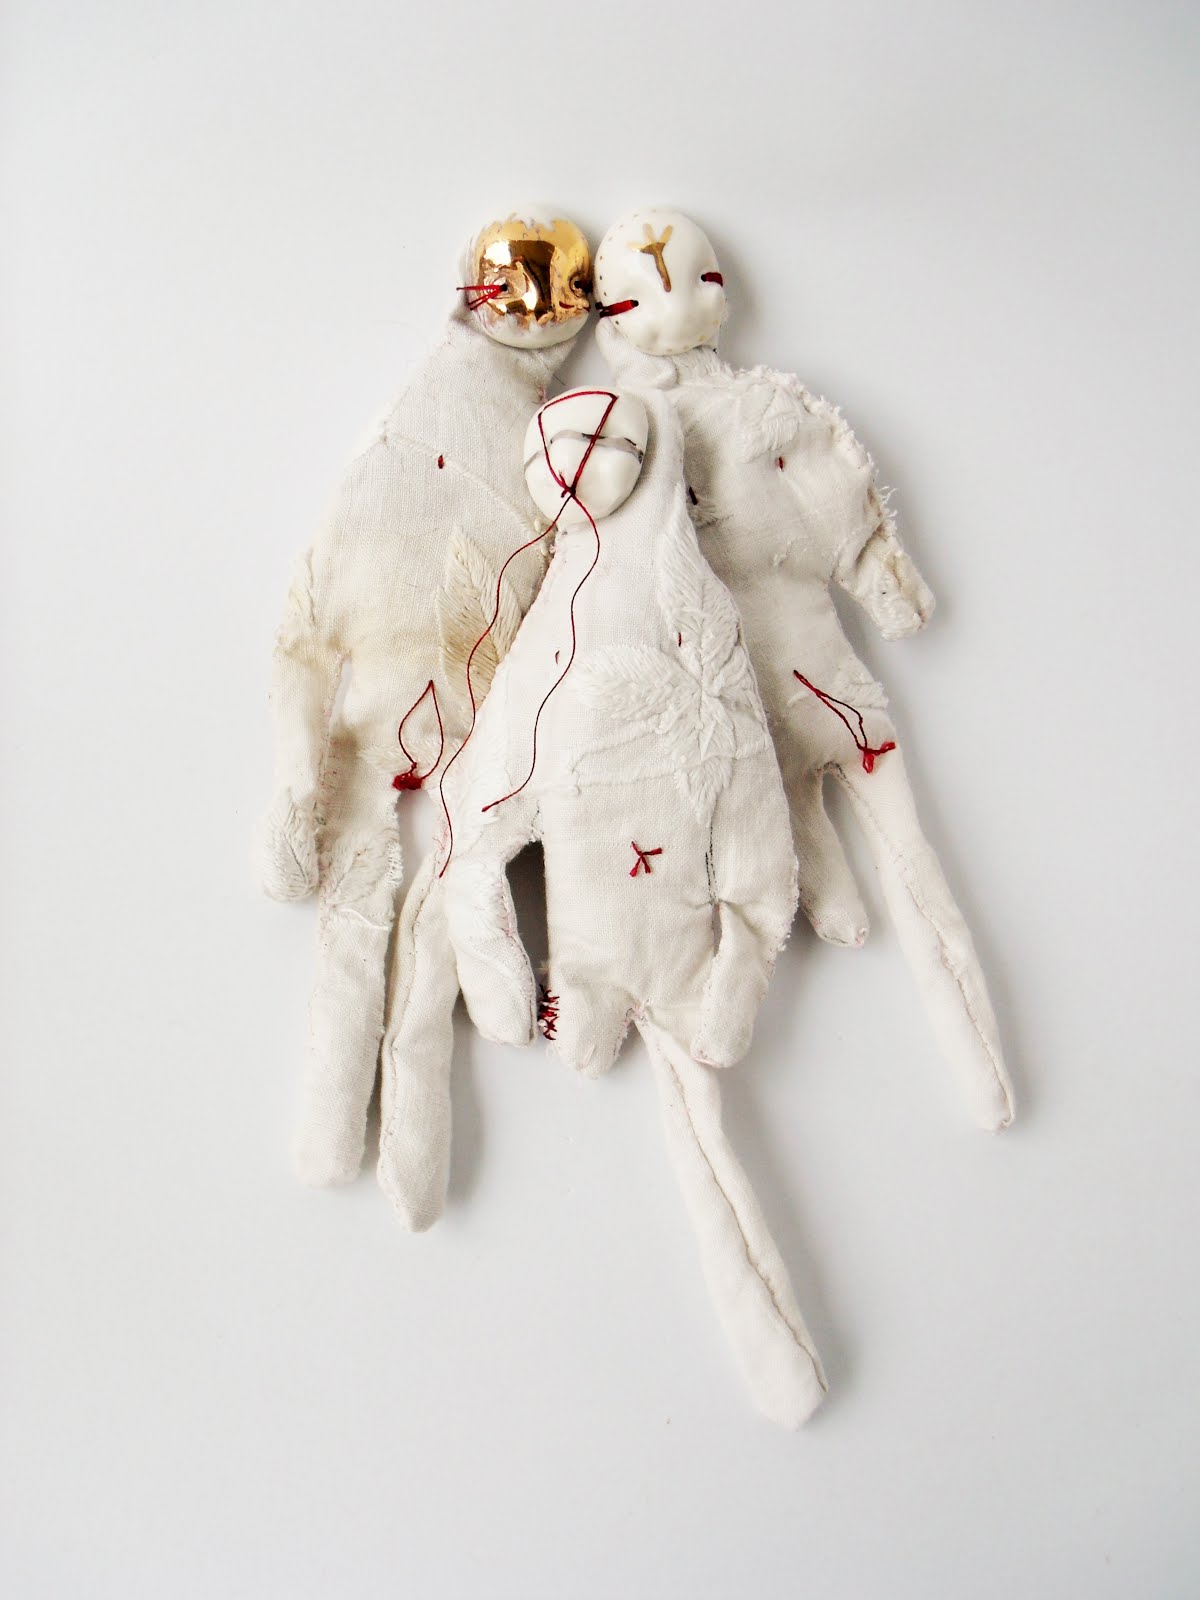 The Removing of the Veil, dolls, 2016